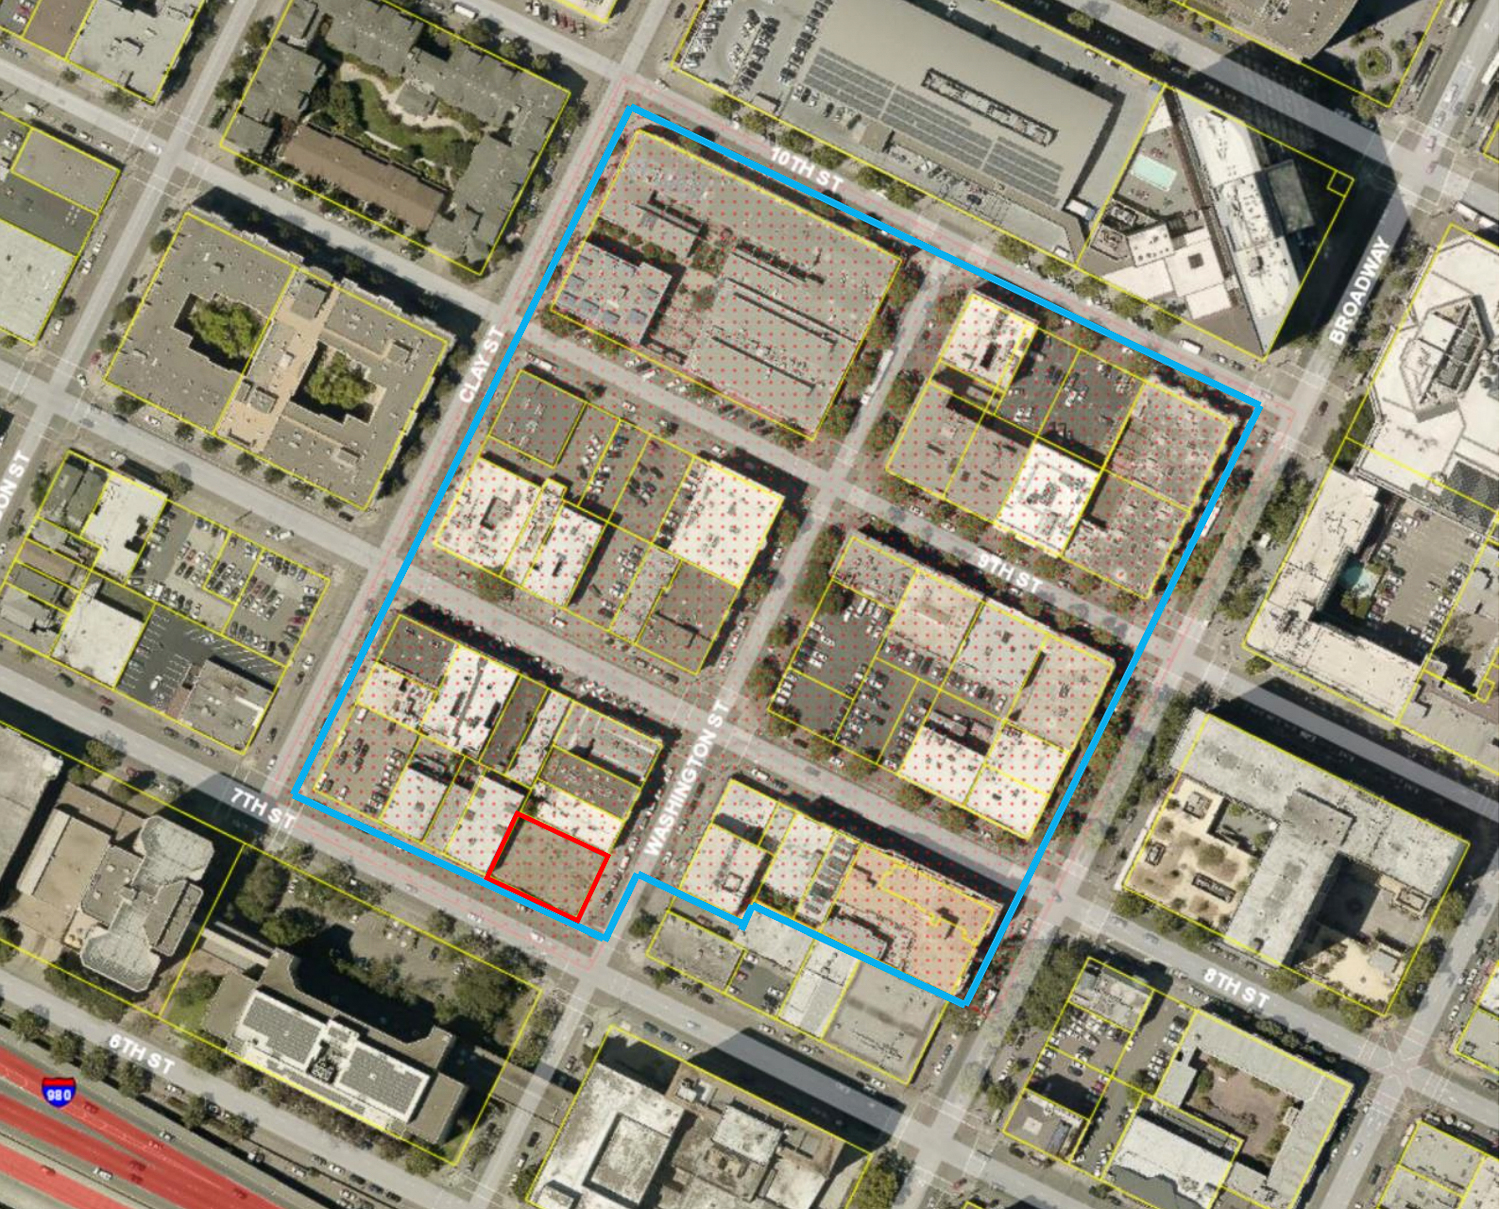 Old Oakland Historic District outlined in blue, with 707 Washington outlined in red, image by Page & Turnbull